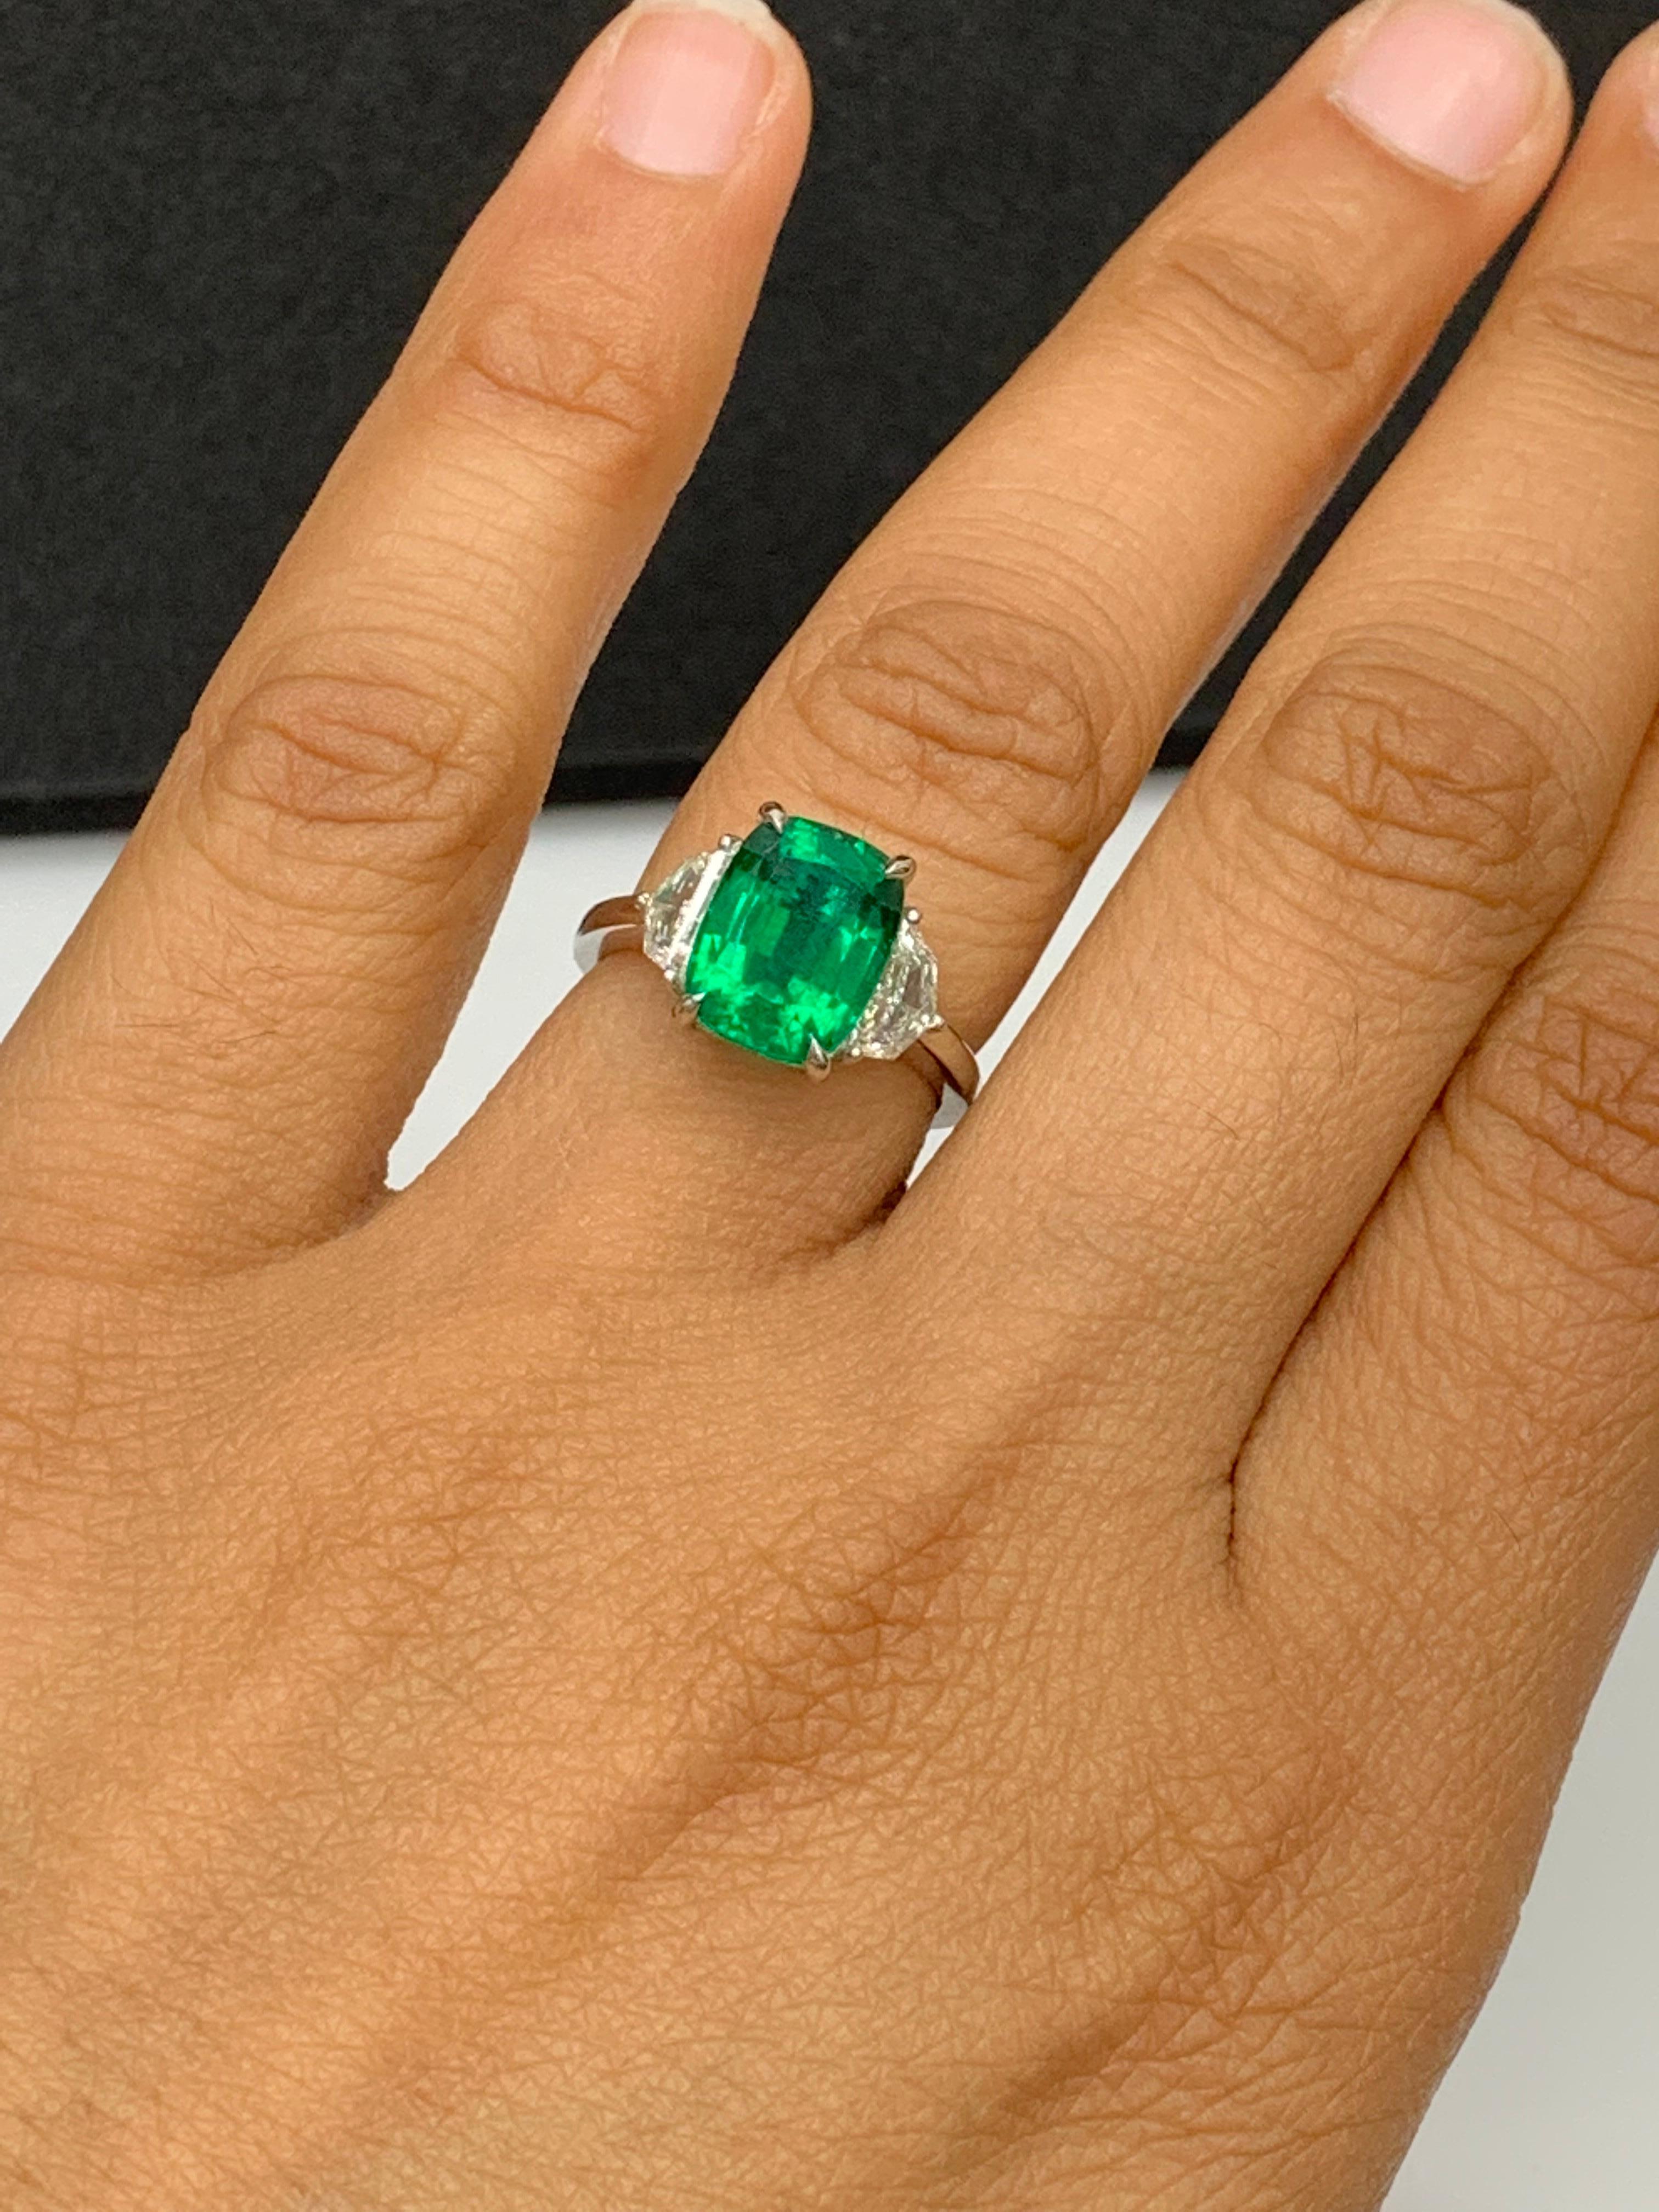 Certified 3.49 Carat Cushion Cut Emerald & Diamond Engagement Ring in Platinum For Sale 5